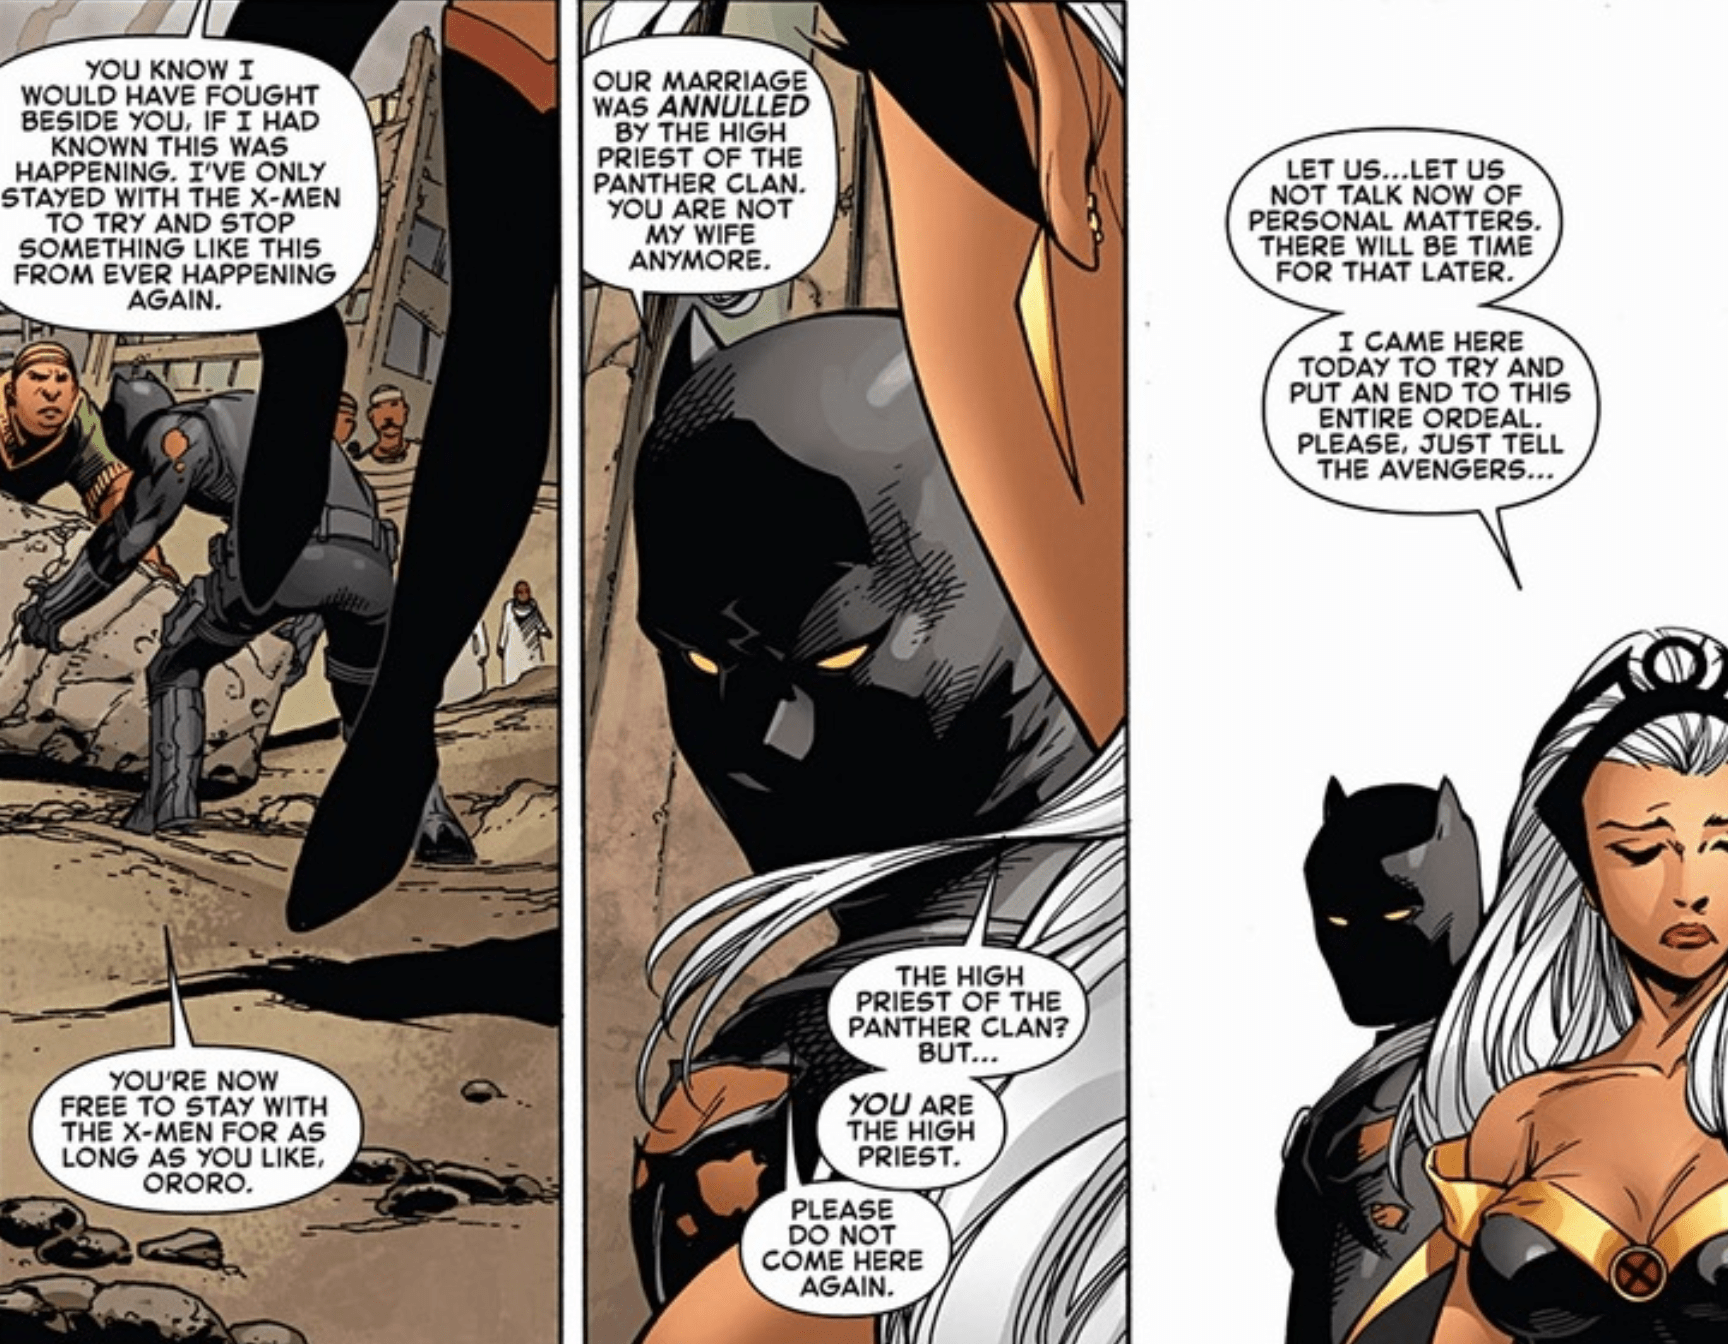 Chris Claremont Thinks Black Panther’s Marriage To Storm Was A Bad Idea, And He’s Right